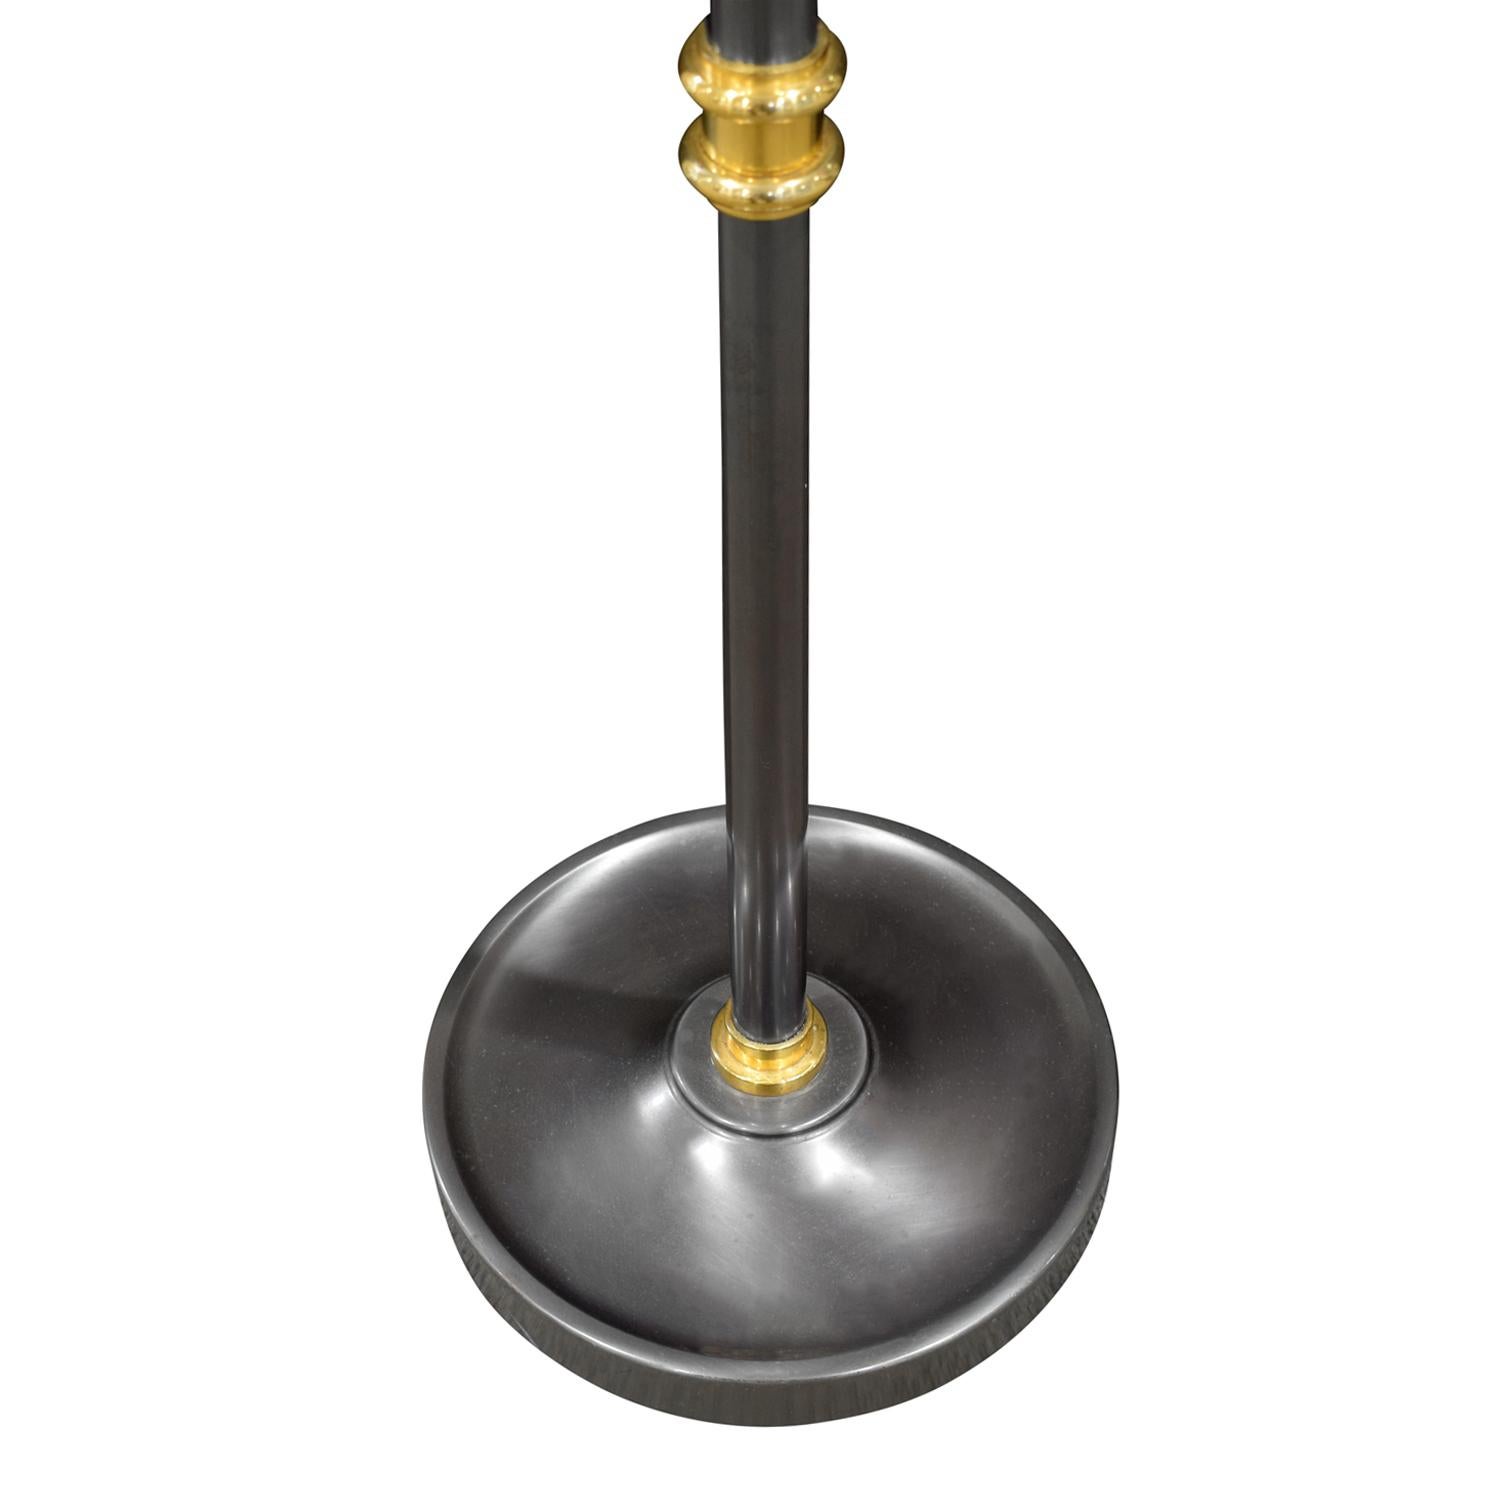 Hand-Crafted Elegant Floor Lamp in Gunmetal with Brass Accents, 1980s For Sale